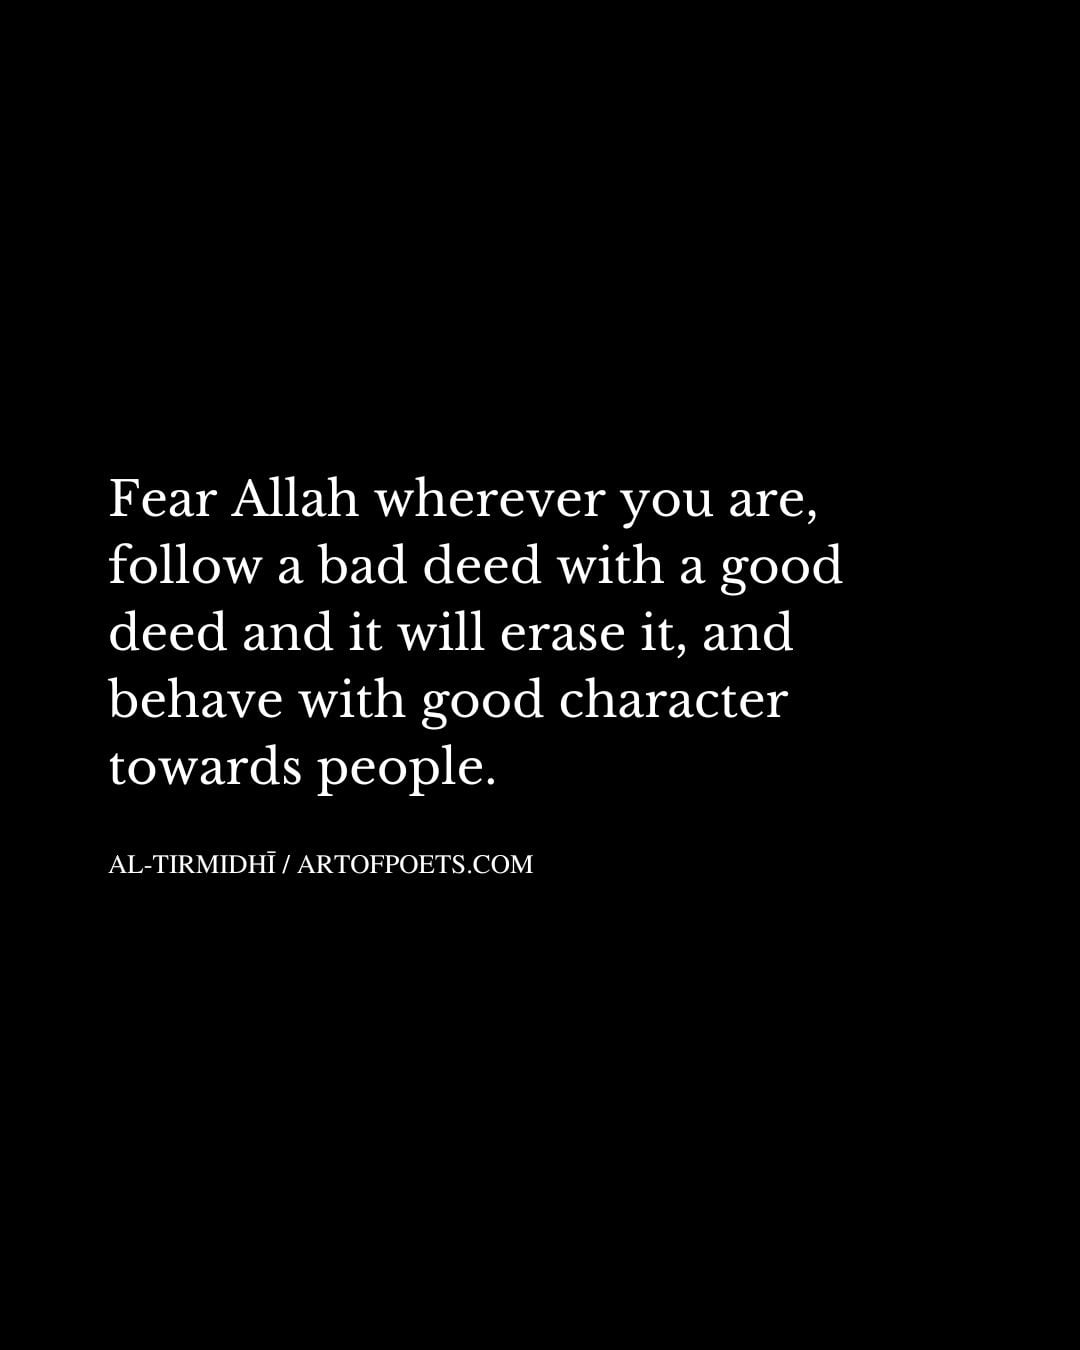 Fear Allah wherever you are follow a bad deed with a good deed and it will erase it and behave with good character towards people